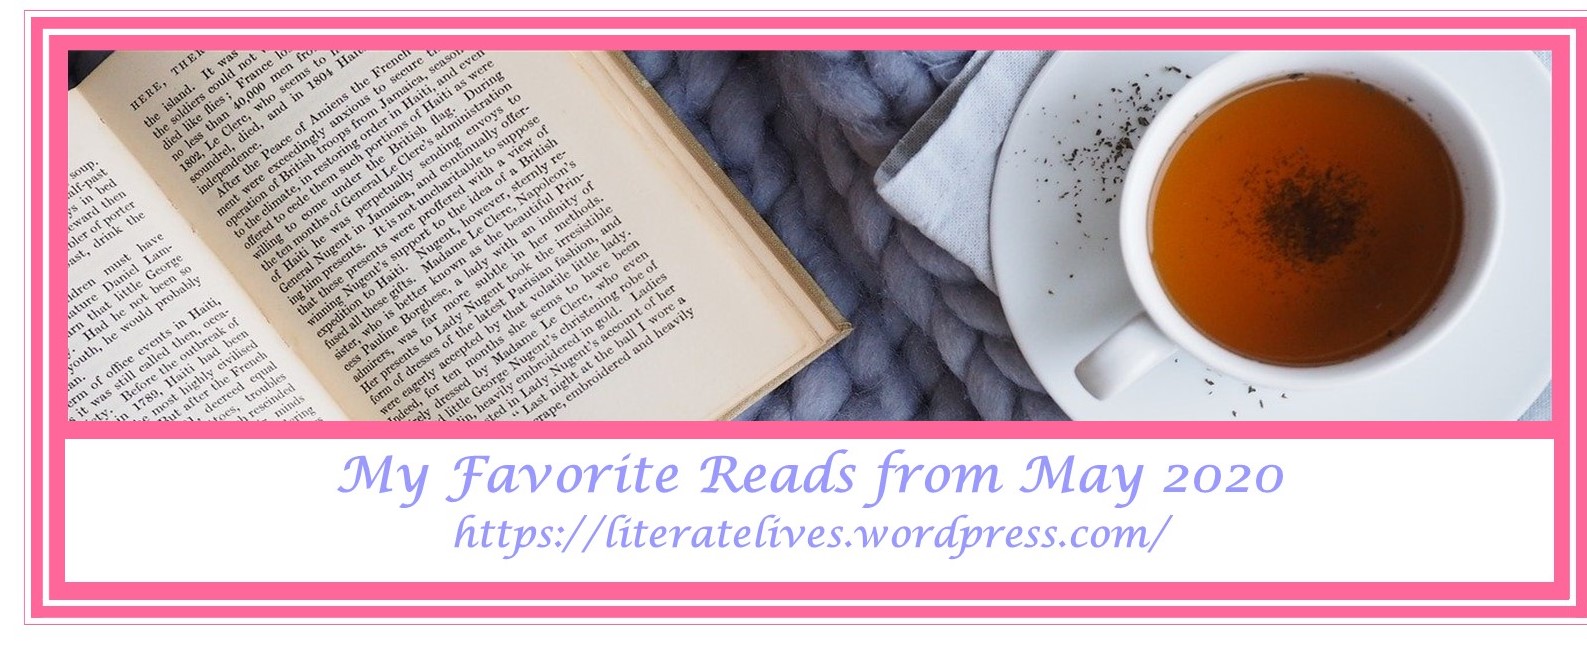 My Favorite Reads from May 2020, 